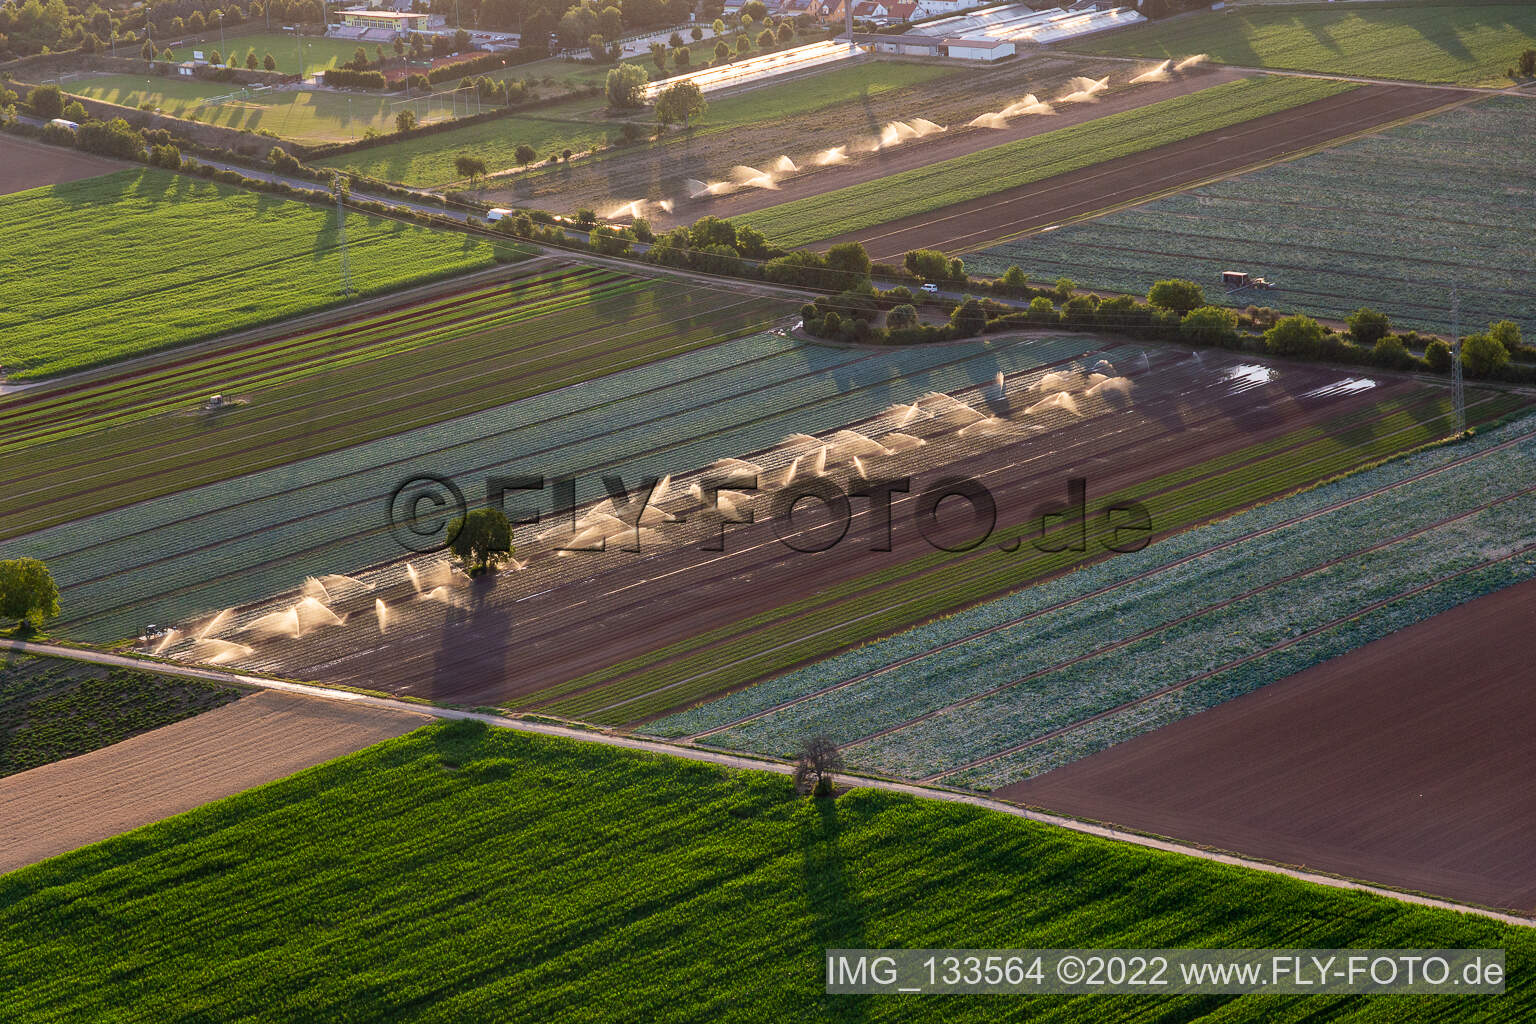 Irrigation of the vegetable fields in Lustadt in the state Rhineland-Palatinate, Germany